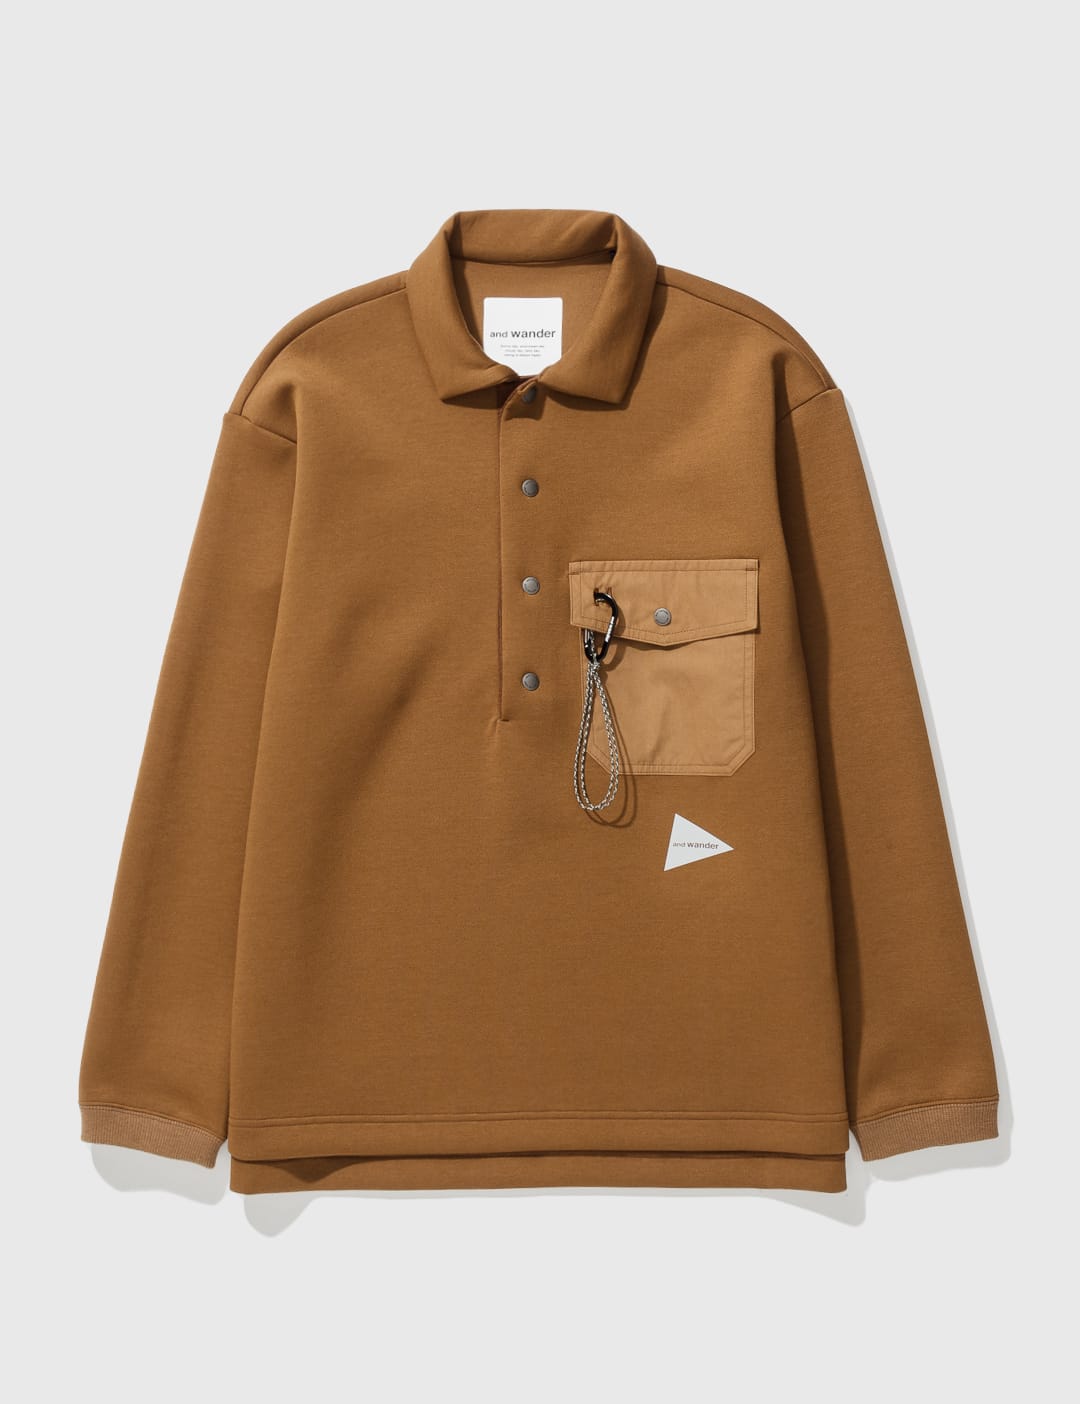 and wander - Airly Warm Button Pullover | HBX - HYPEBEAST 为您搜罗